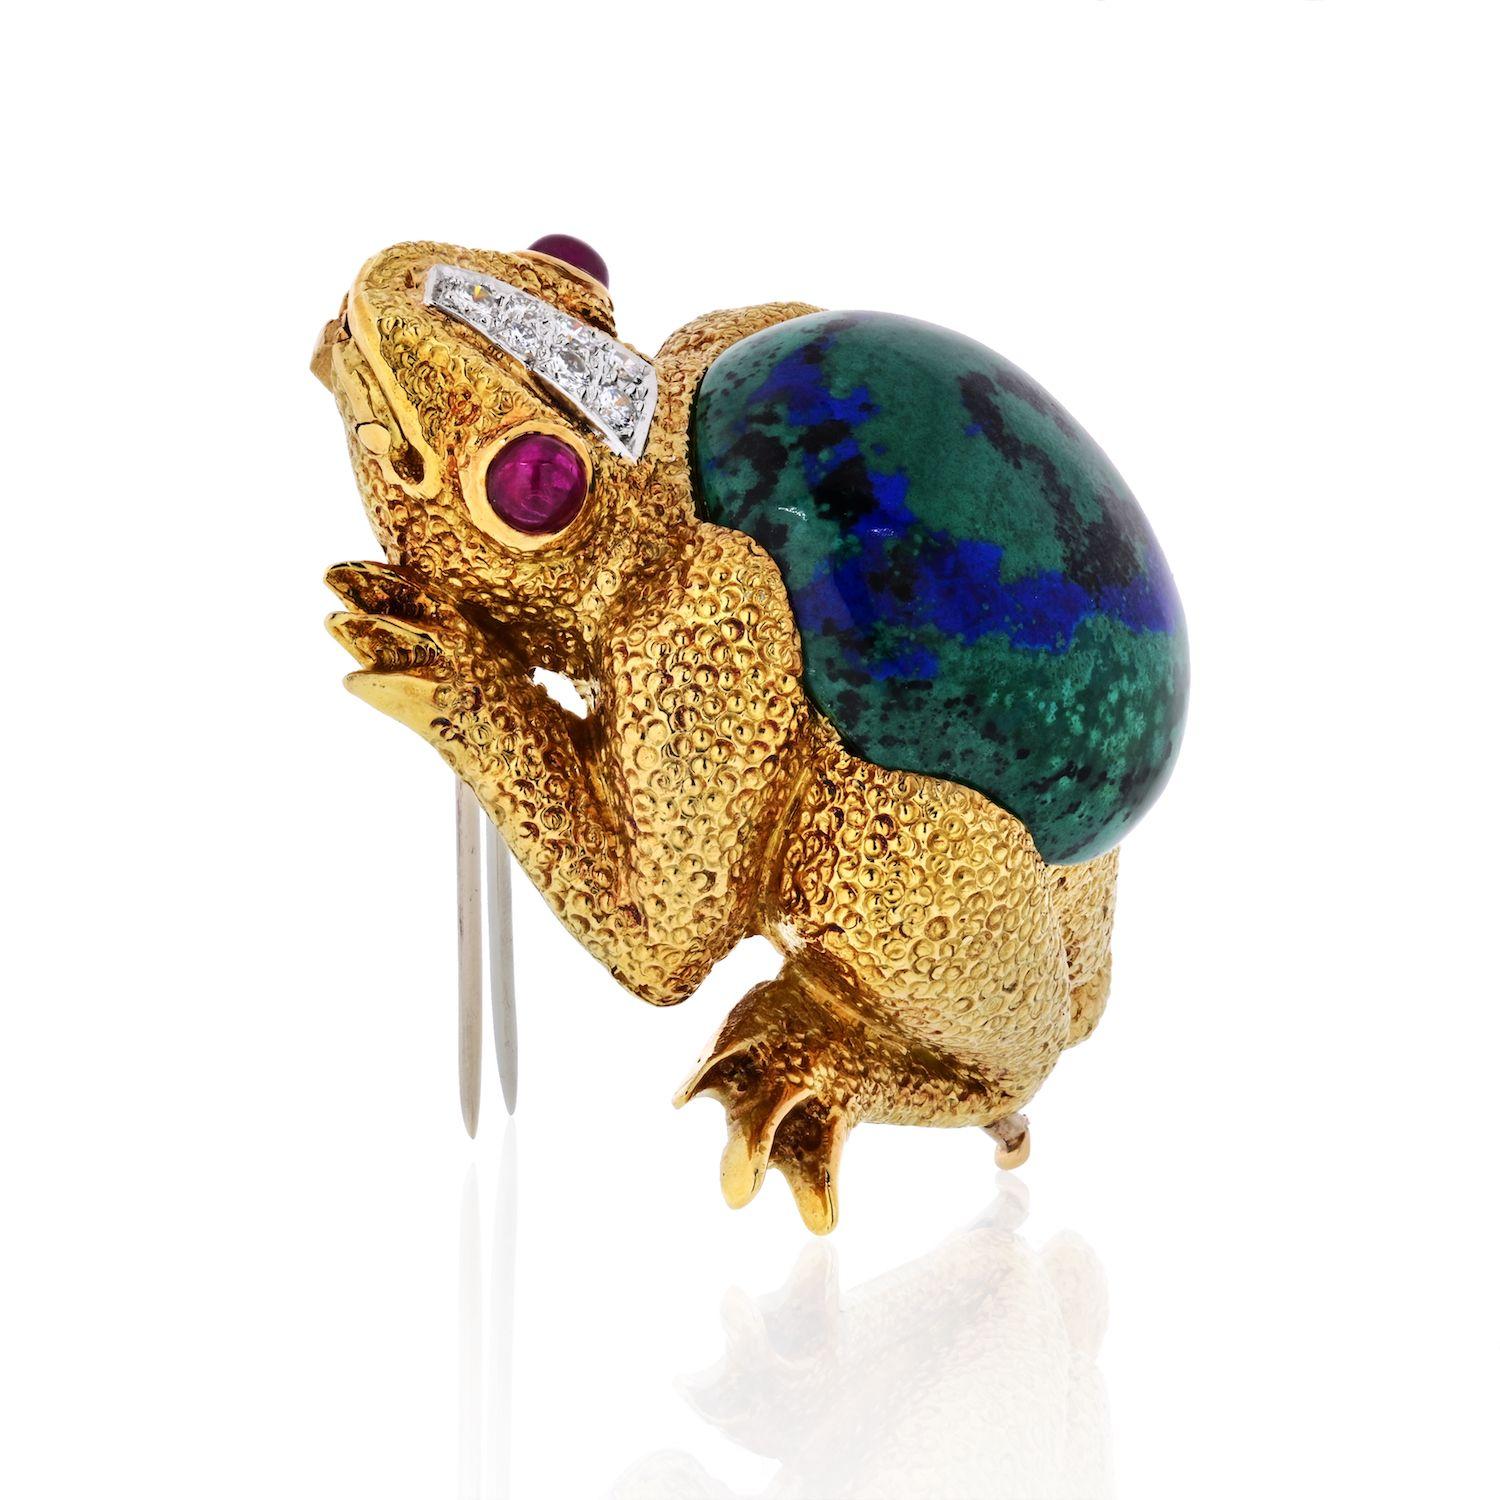 Part of the David Webb Kingdom Collection, this 18k and platinum frog brooch is exquisitely accentuated by diamonds, cabochon azurite and rubies. About 2 inches long. 49gr.
